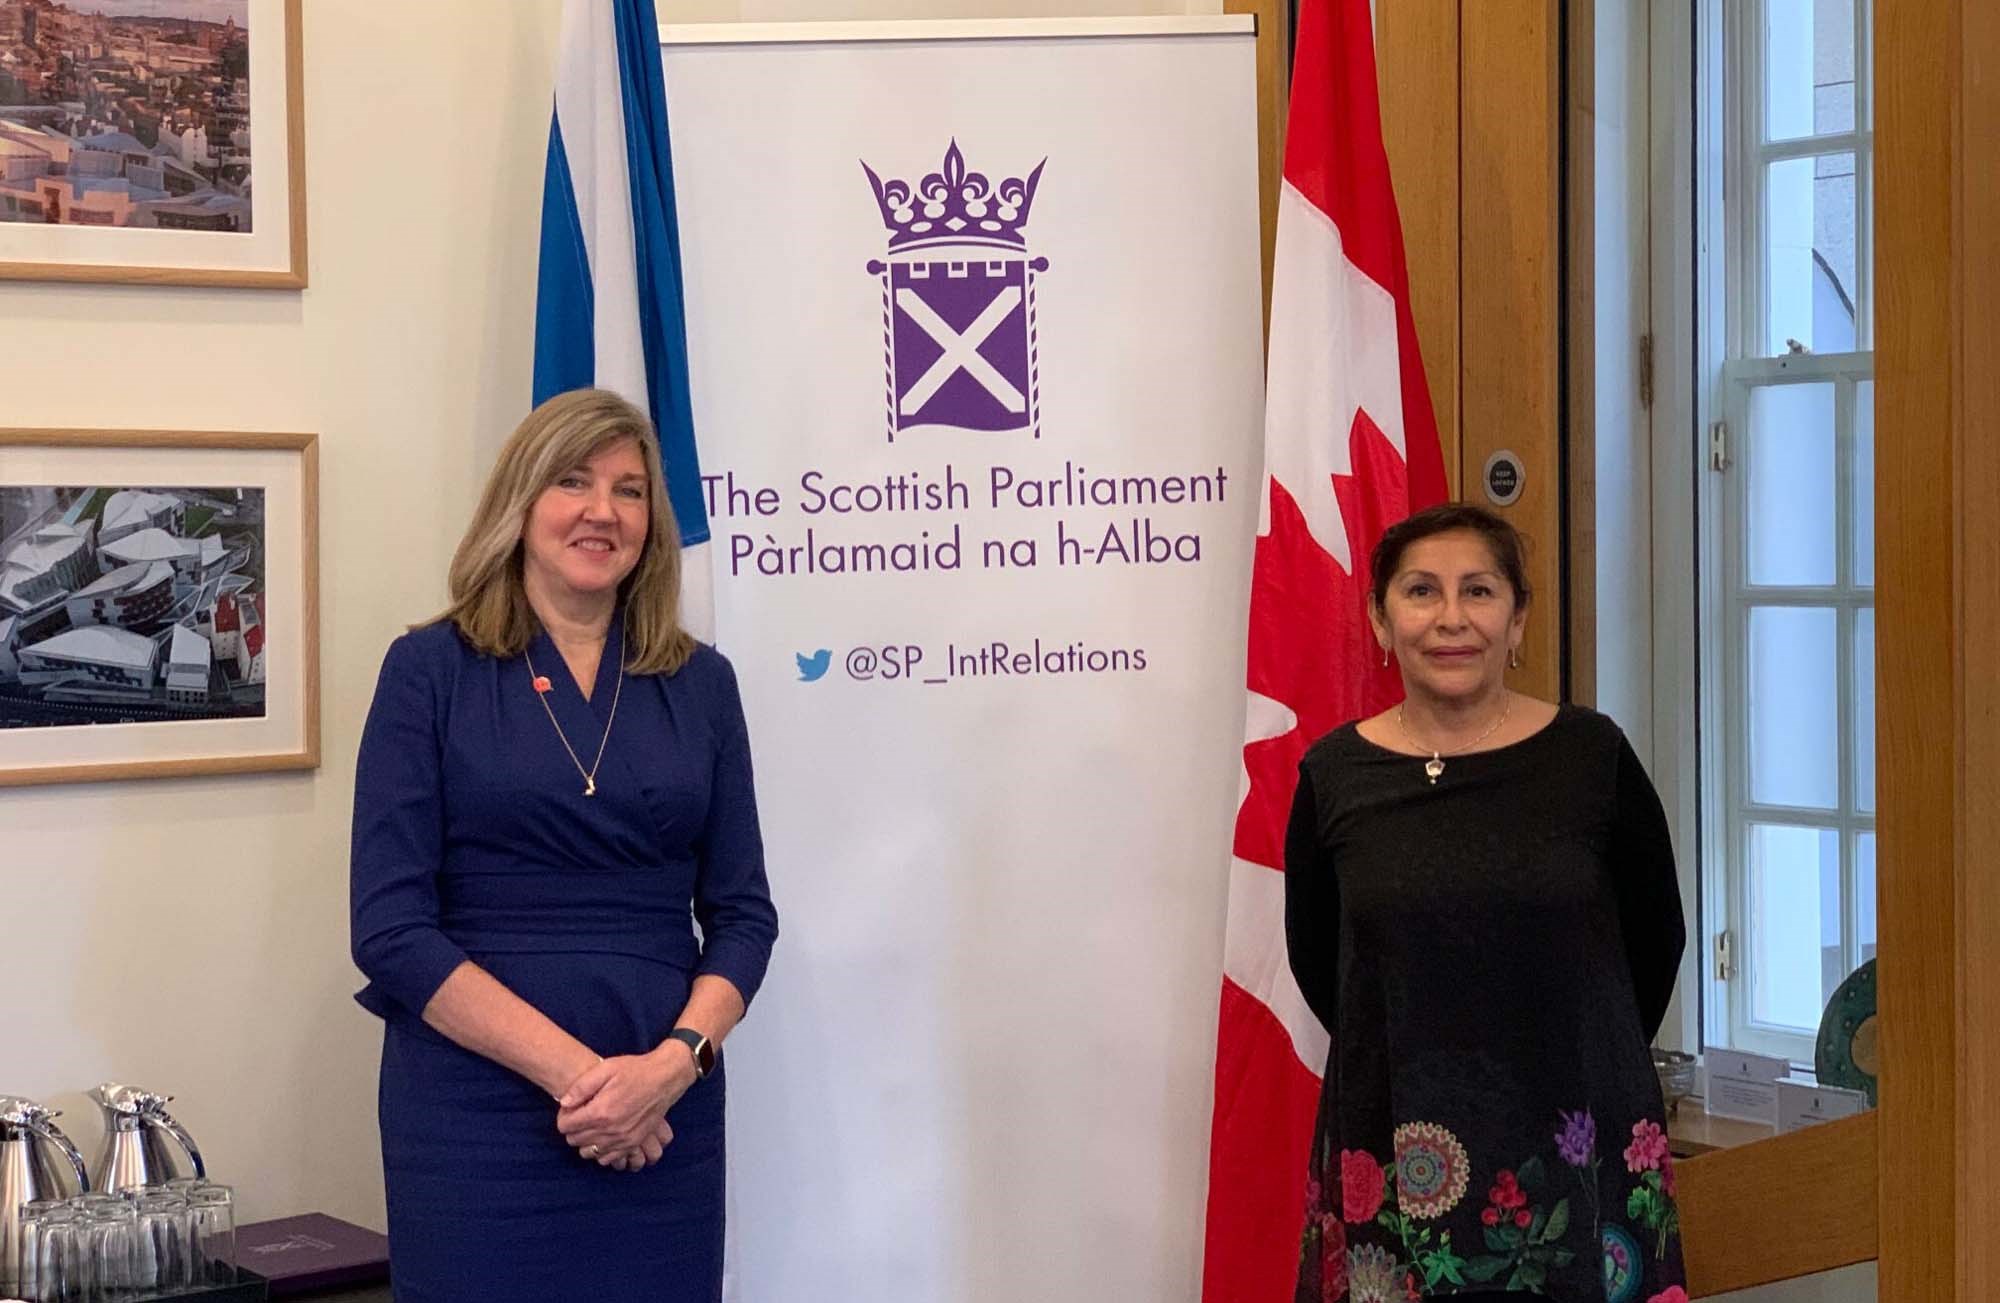 Friday, November 5, 2021 – Senator Rosa Galvez meets Alison Johnstone, the Presiding Officer of the Scottish Parliament, during the GLOBE COP26 Legislators Summit in Edinburgh, Scotland. The two parliamentarians discussed the impacts of climate change.